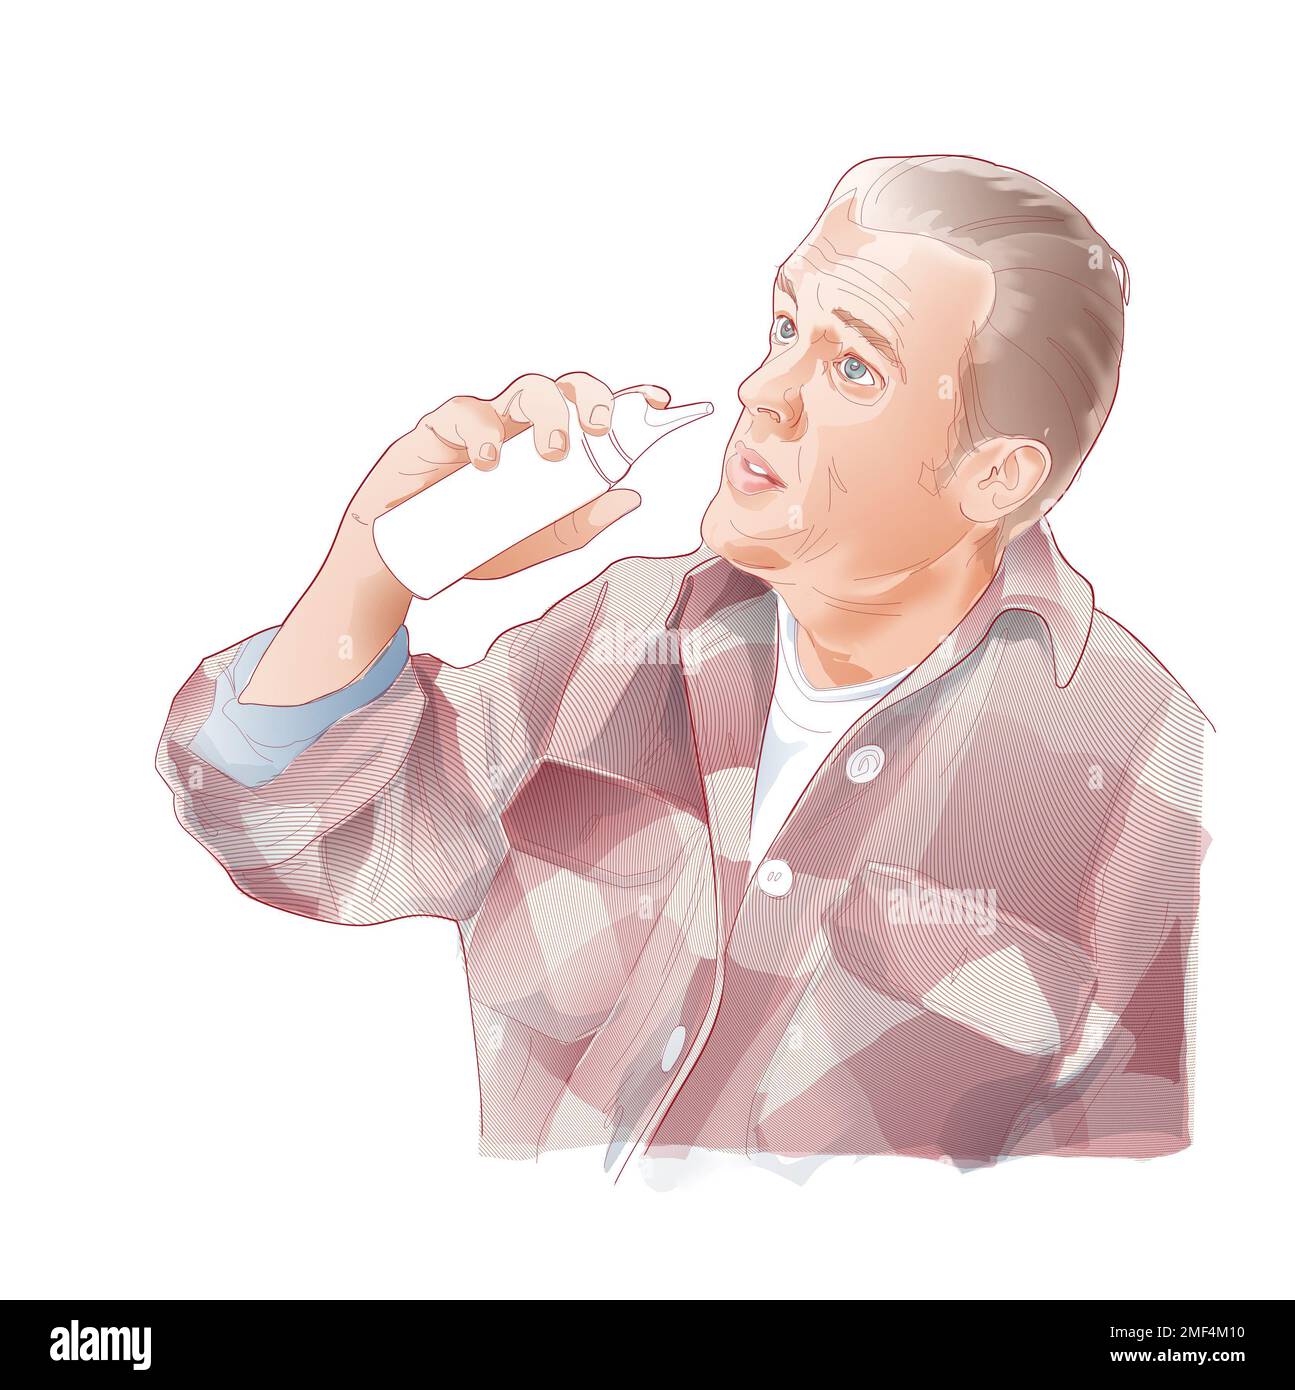 Digital illustration of a man with an inhaler. Aspirate the contents of the medication. Stock Photo